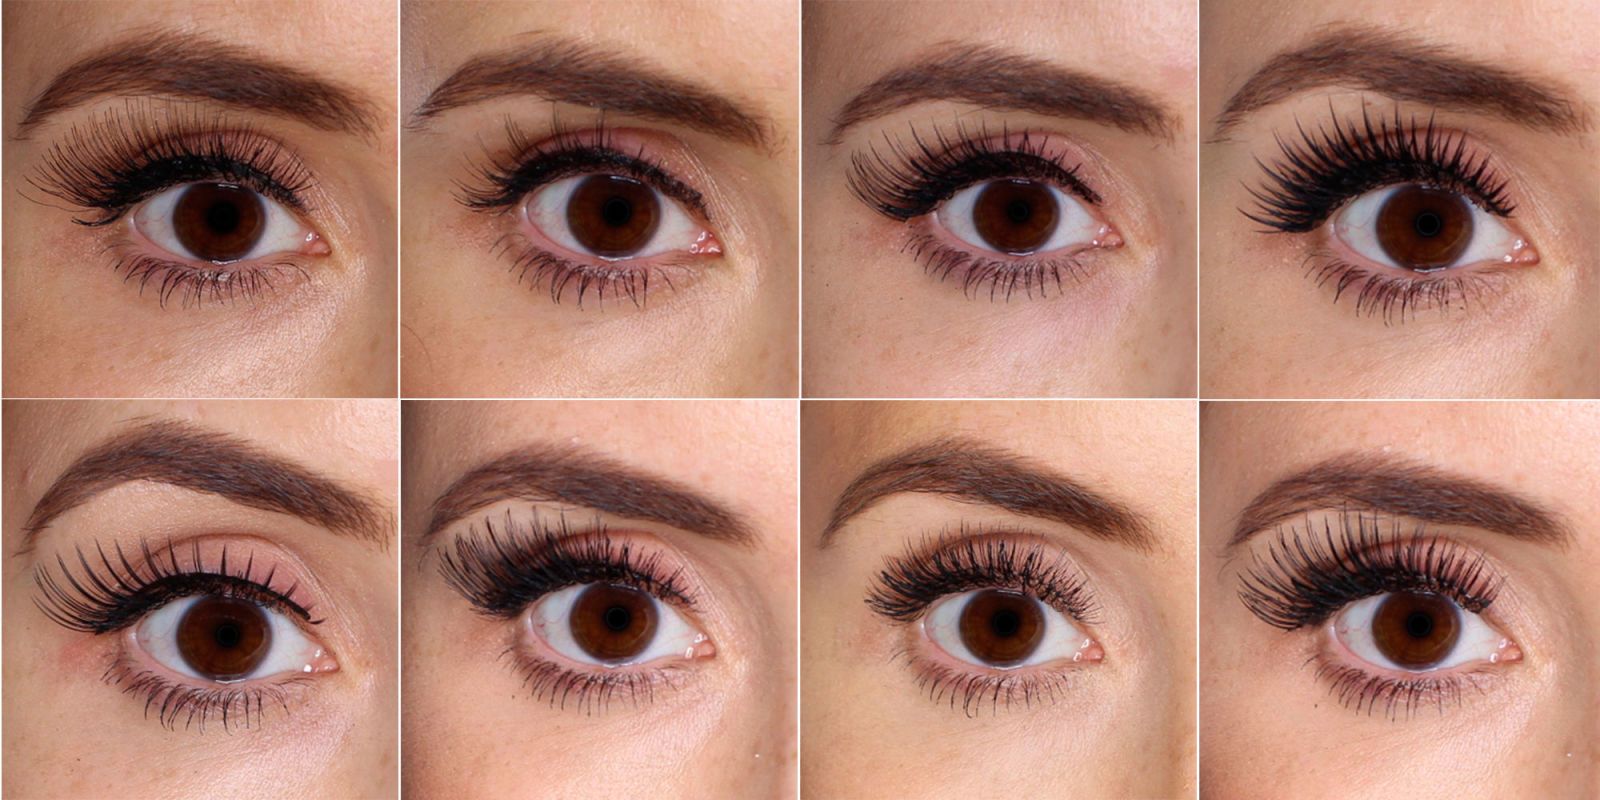 100 false lashes tested on ONE eye: picture reviews